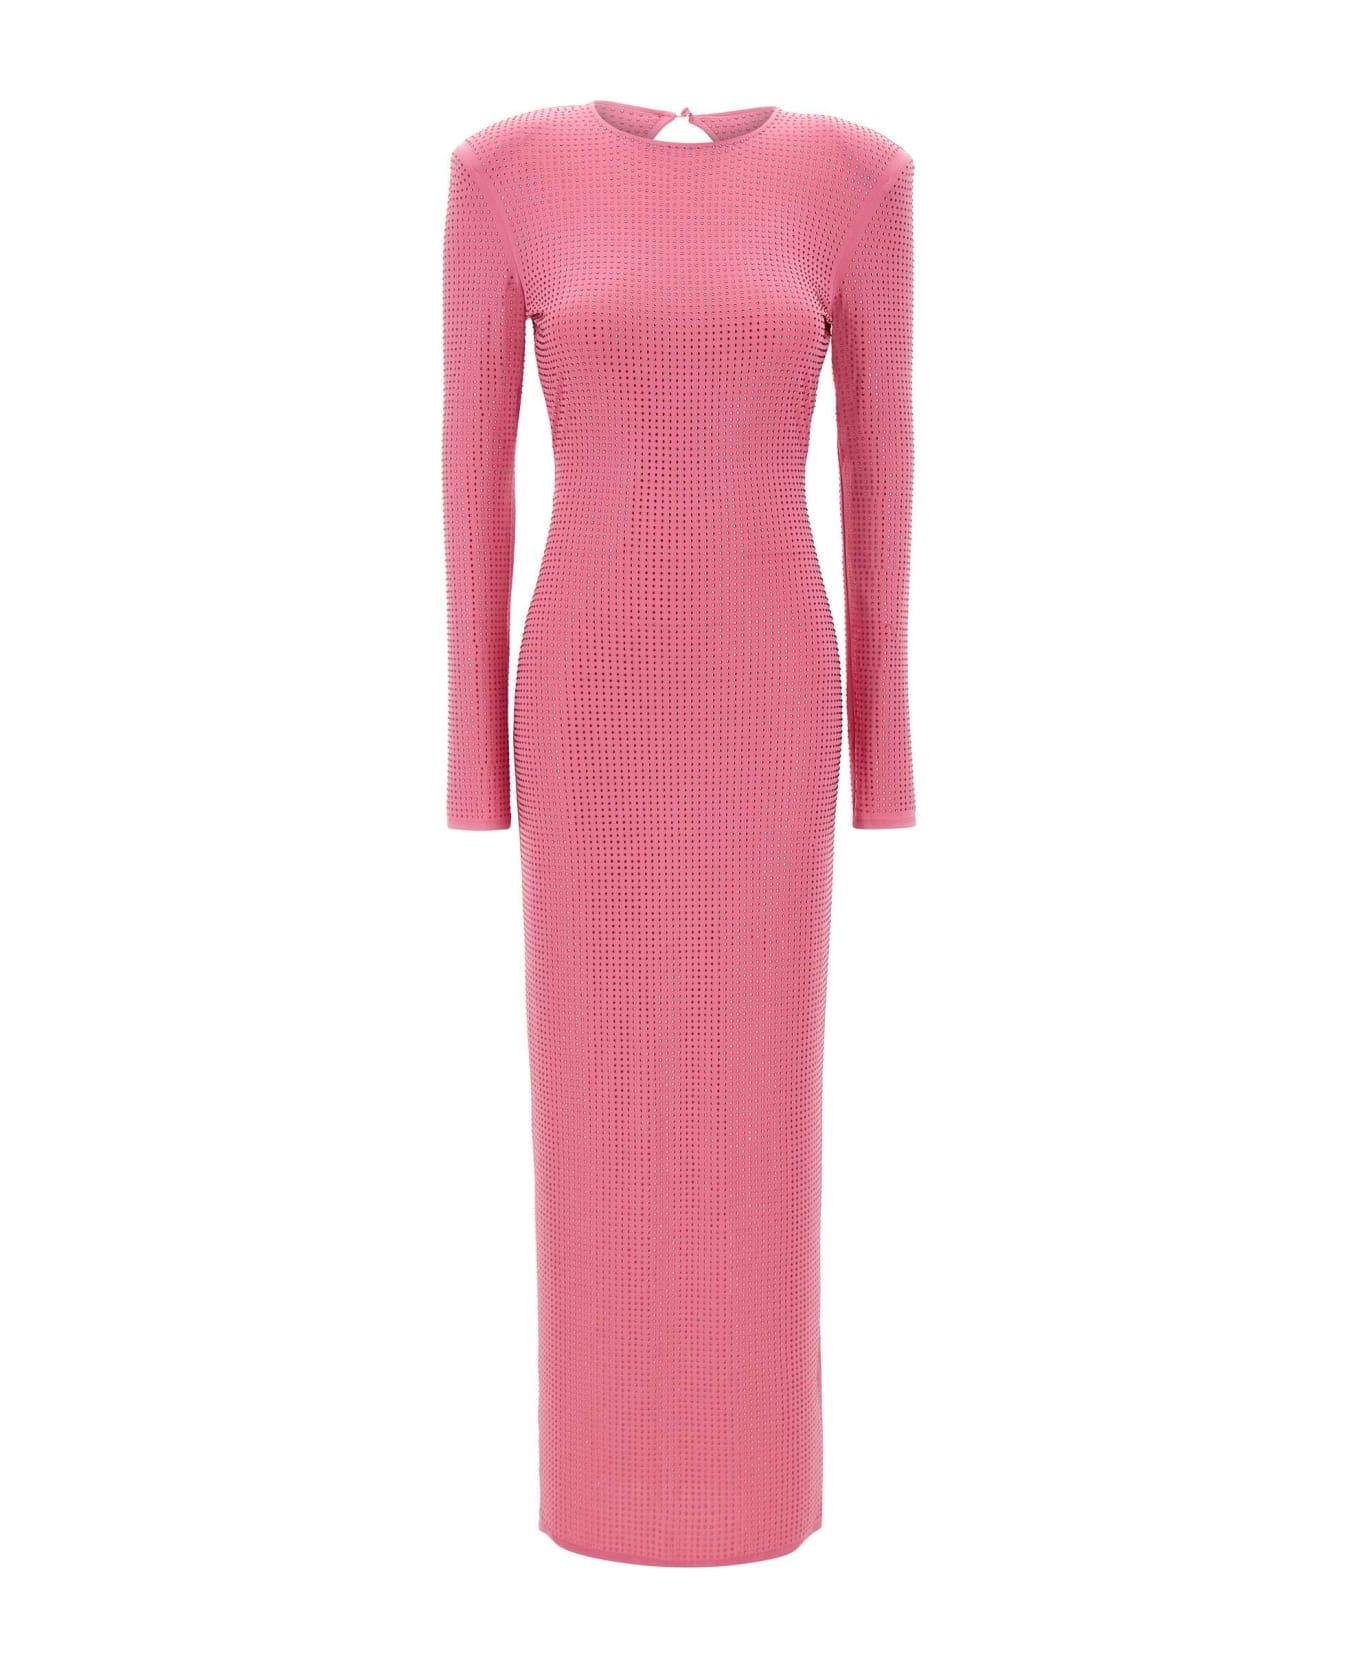 Rotate by Birger Christensen 'embellished Fitted' Dress - PINK